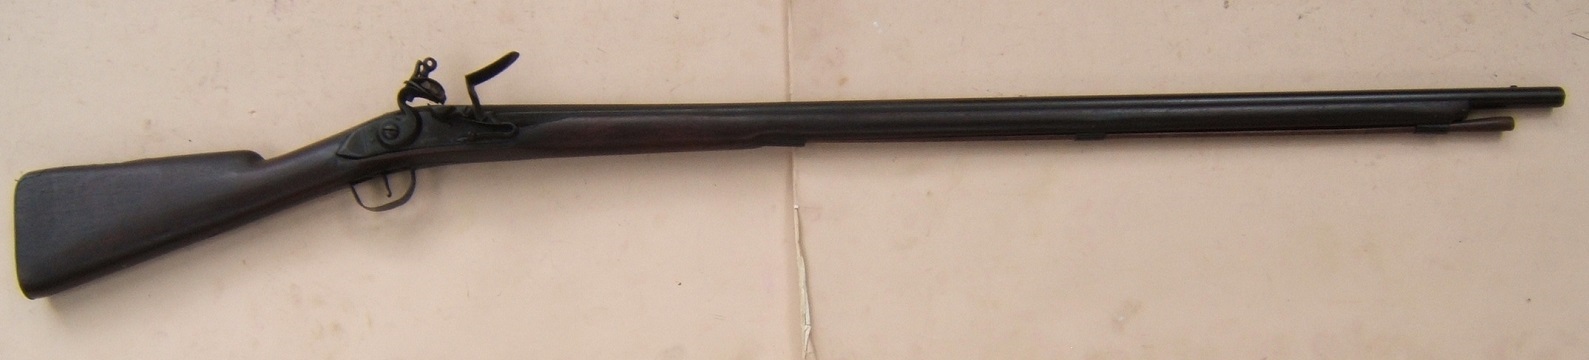 A FINE & SCARCE AMERICAN RESTOCKED FRENCH MODEL 1717/1728 MUSKET, ca. 1720/1785 view 1